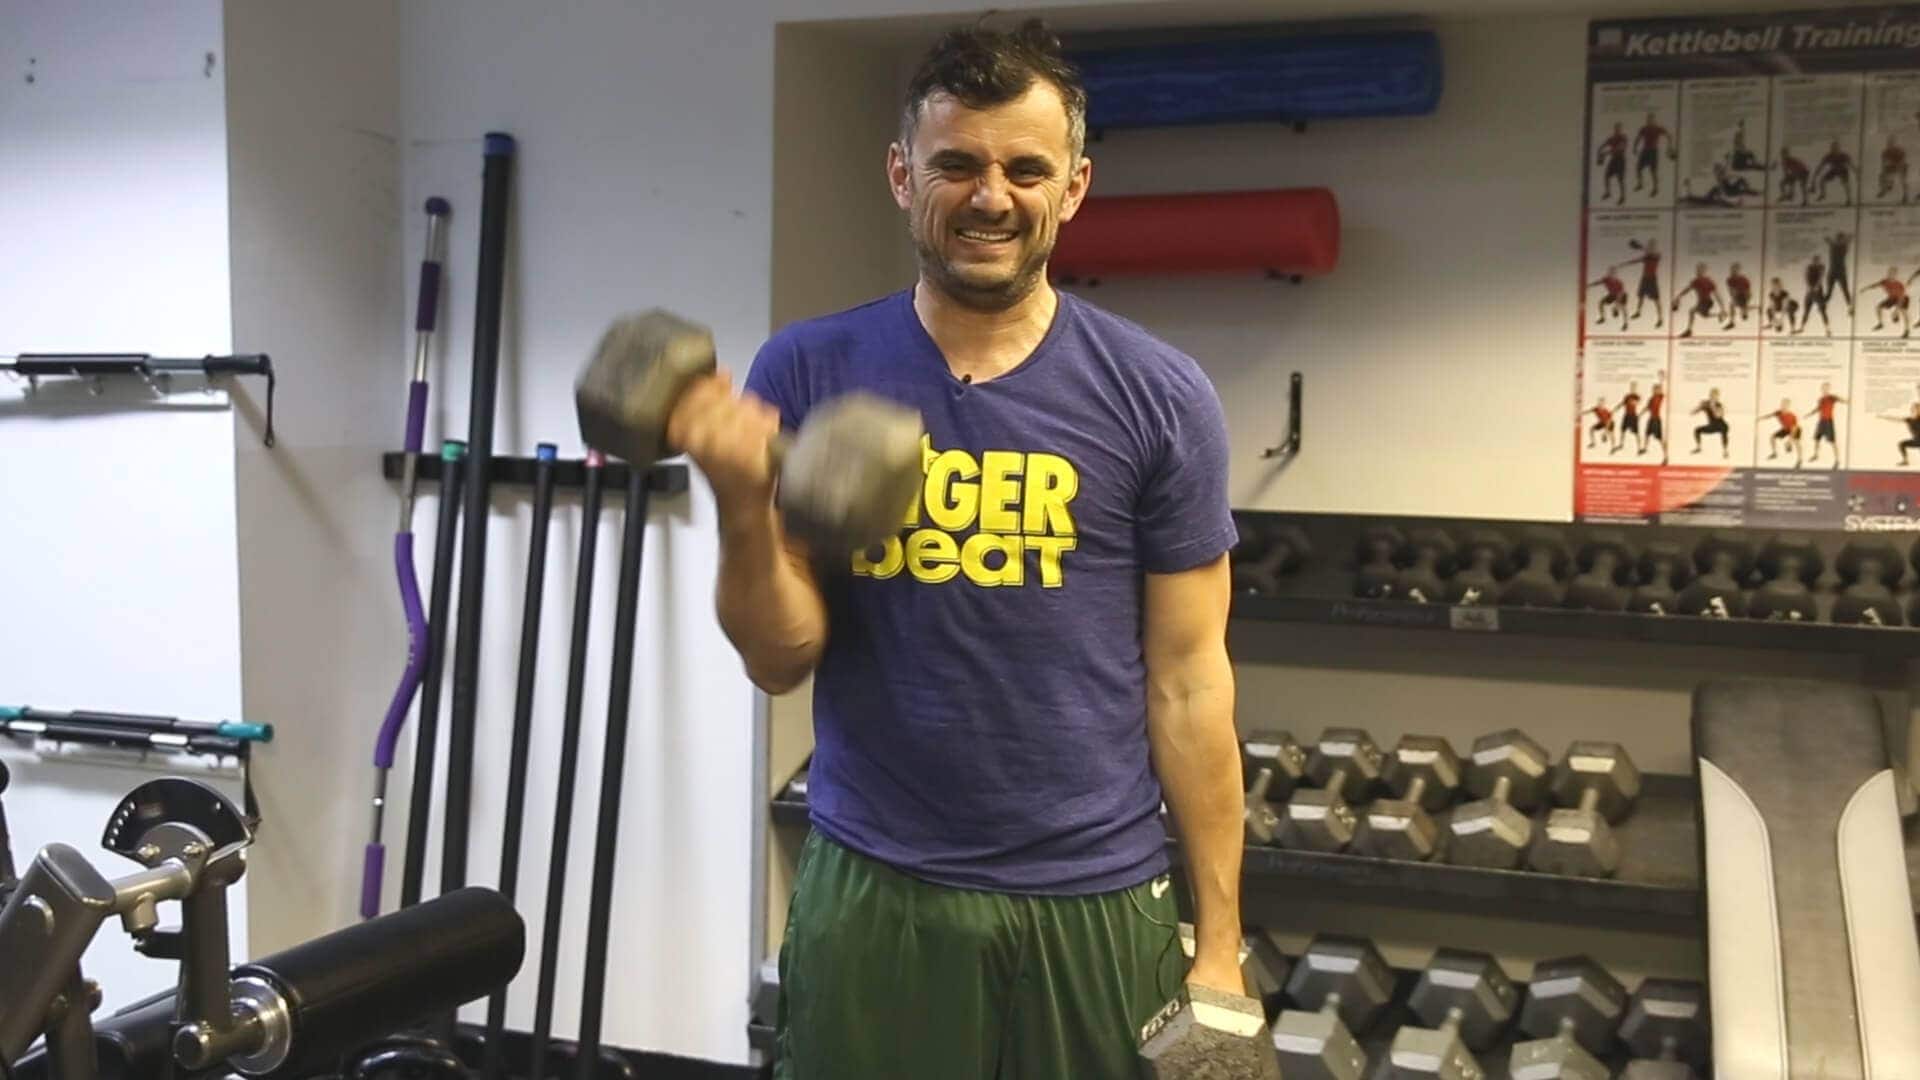 #AskGaryVee Episode 163: Starting a Restaurant, Self-Evaluation, and Mobile Credit Services